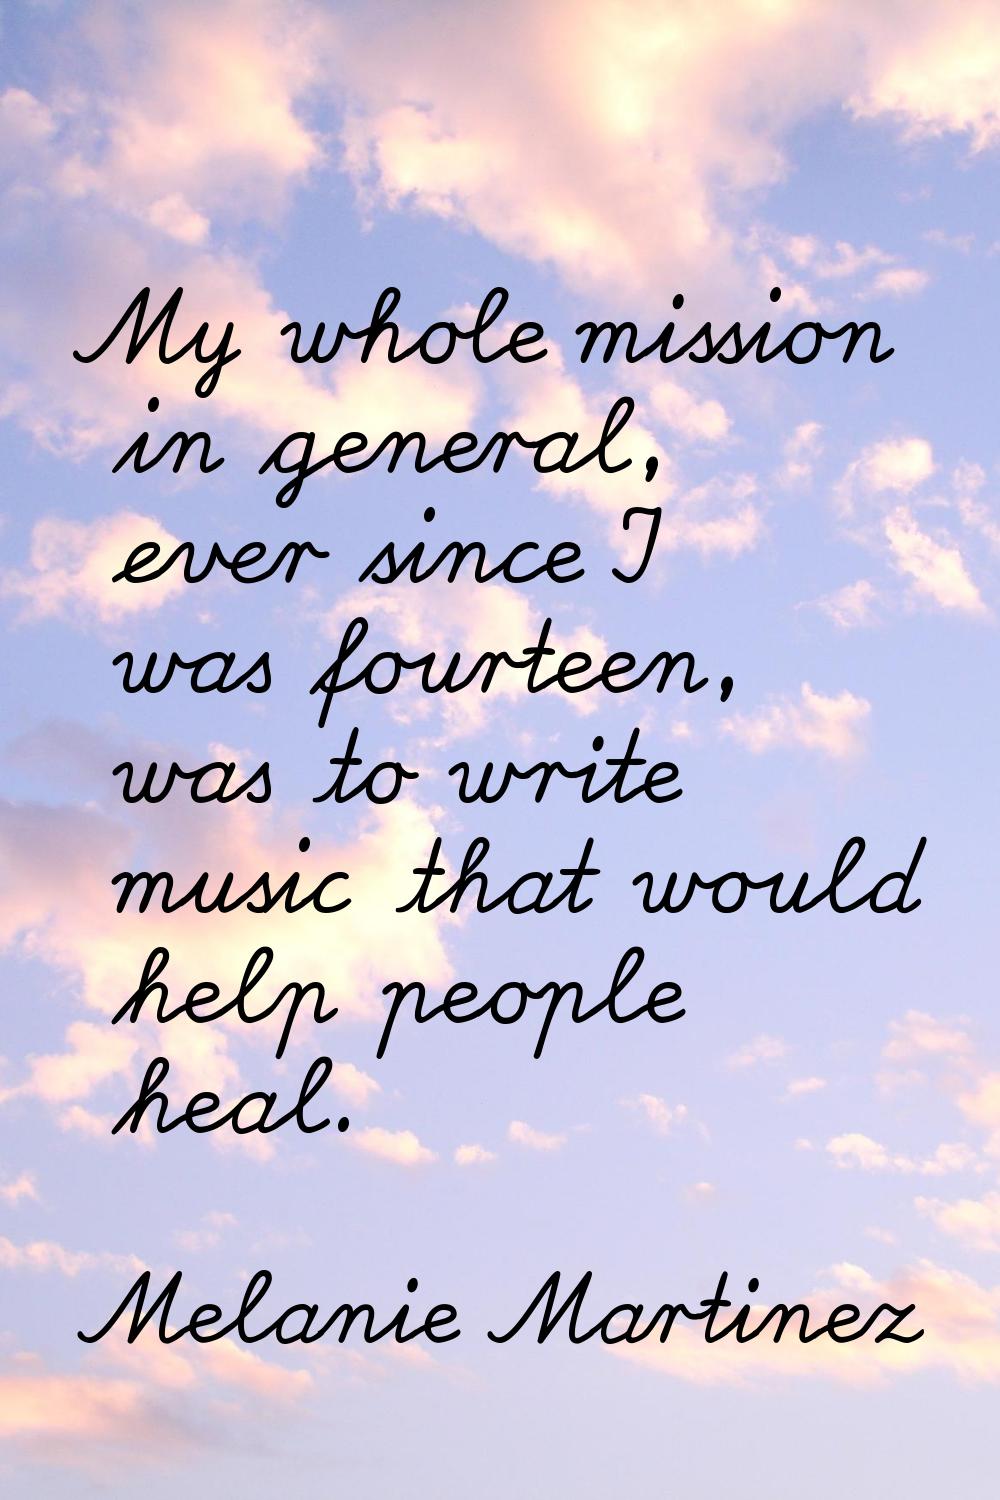 My whole mission in general, ever since I was fourteen, was to write music that would help people h